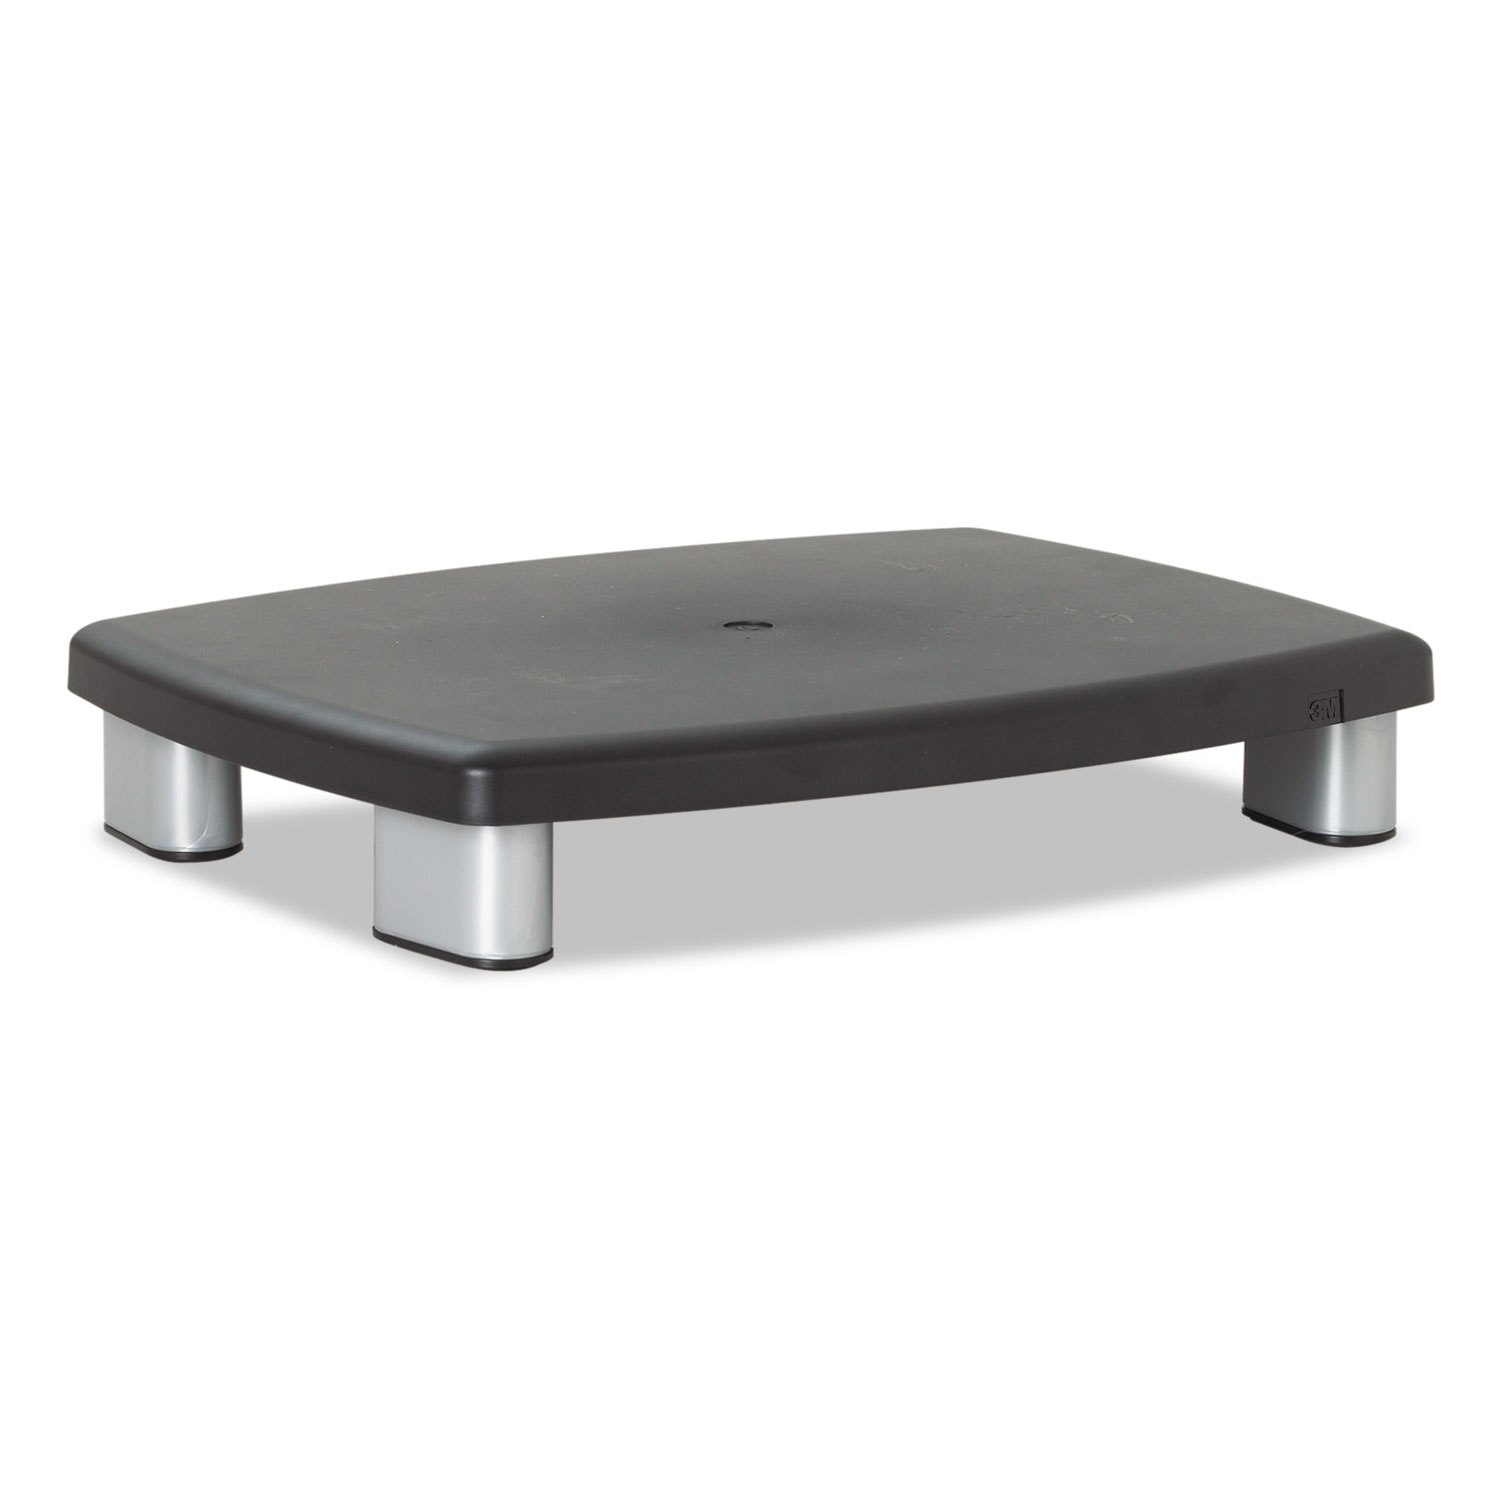 Adjustable Height Monitor Stand, 15 x 12 x 2 5/8 to 5 7/8, Black/Silver